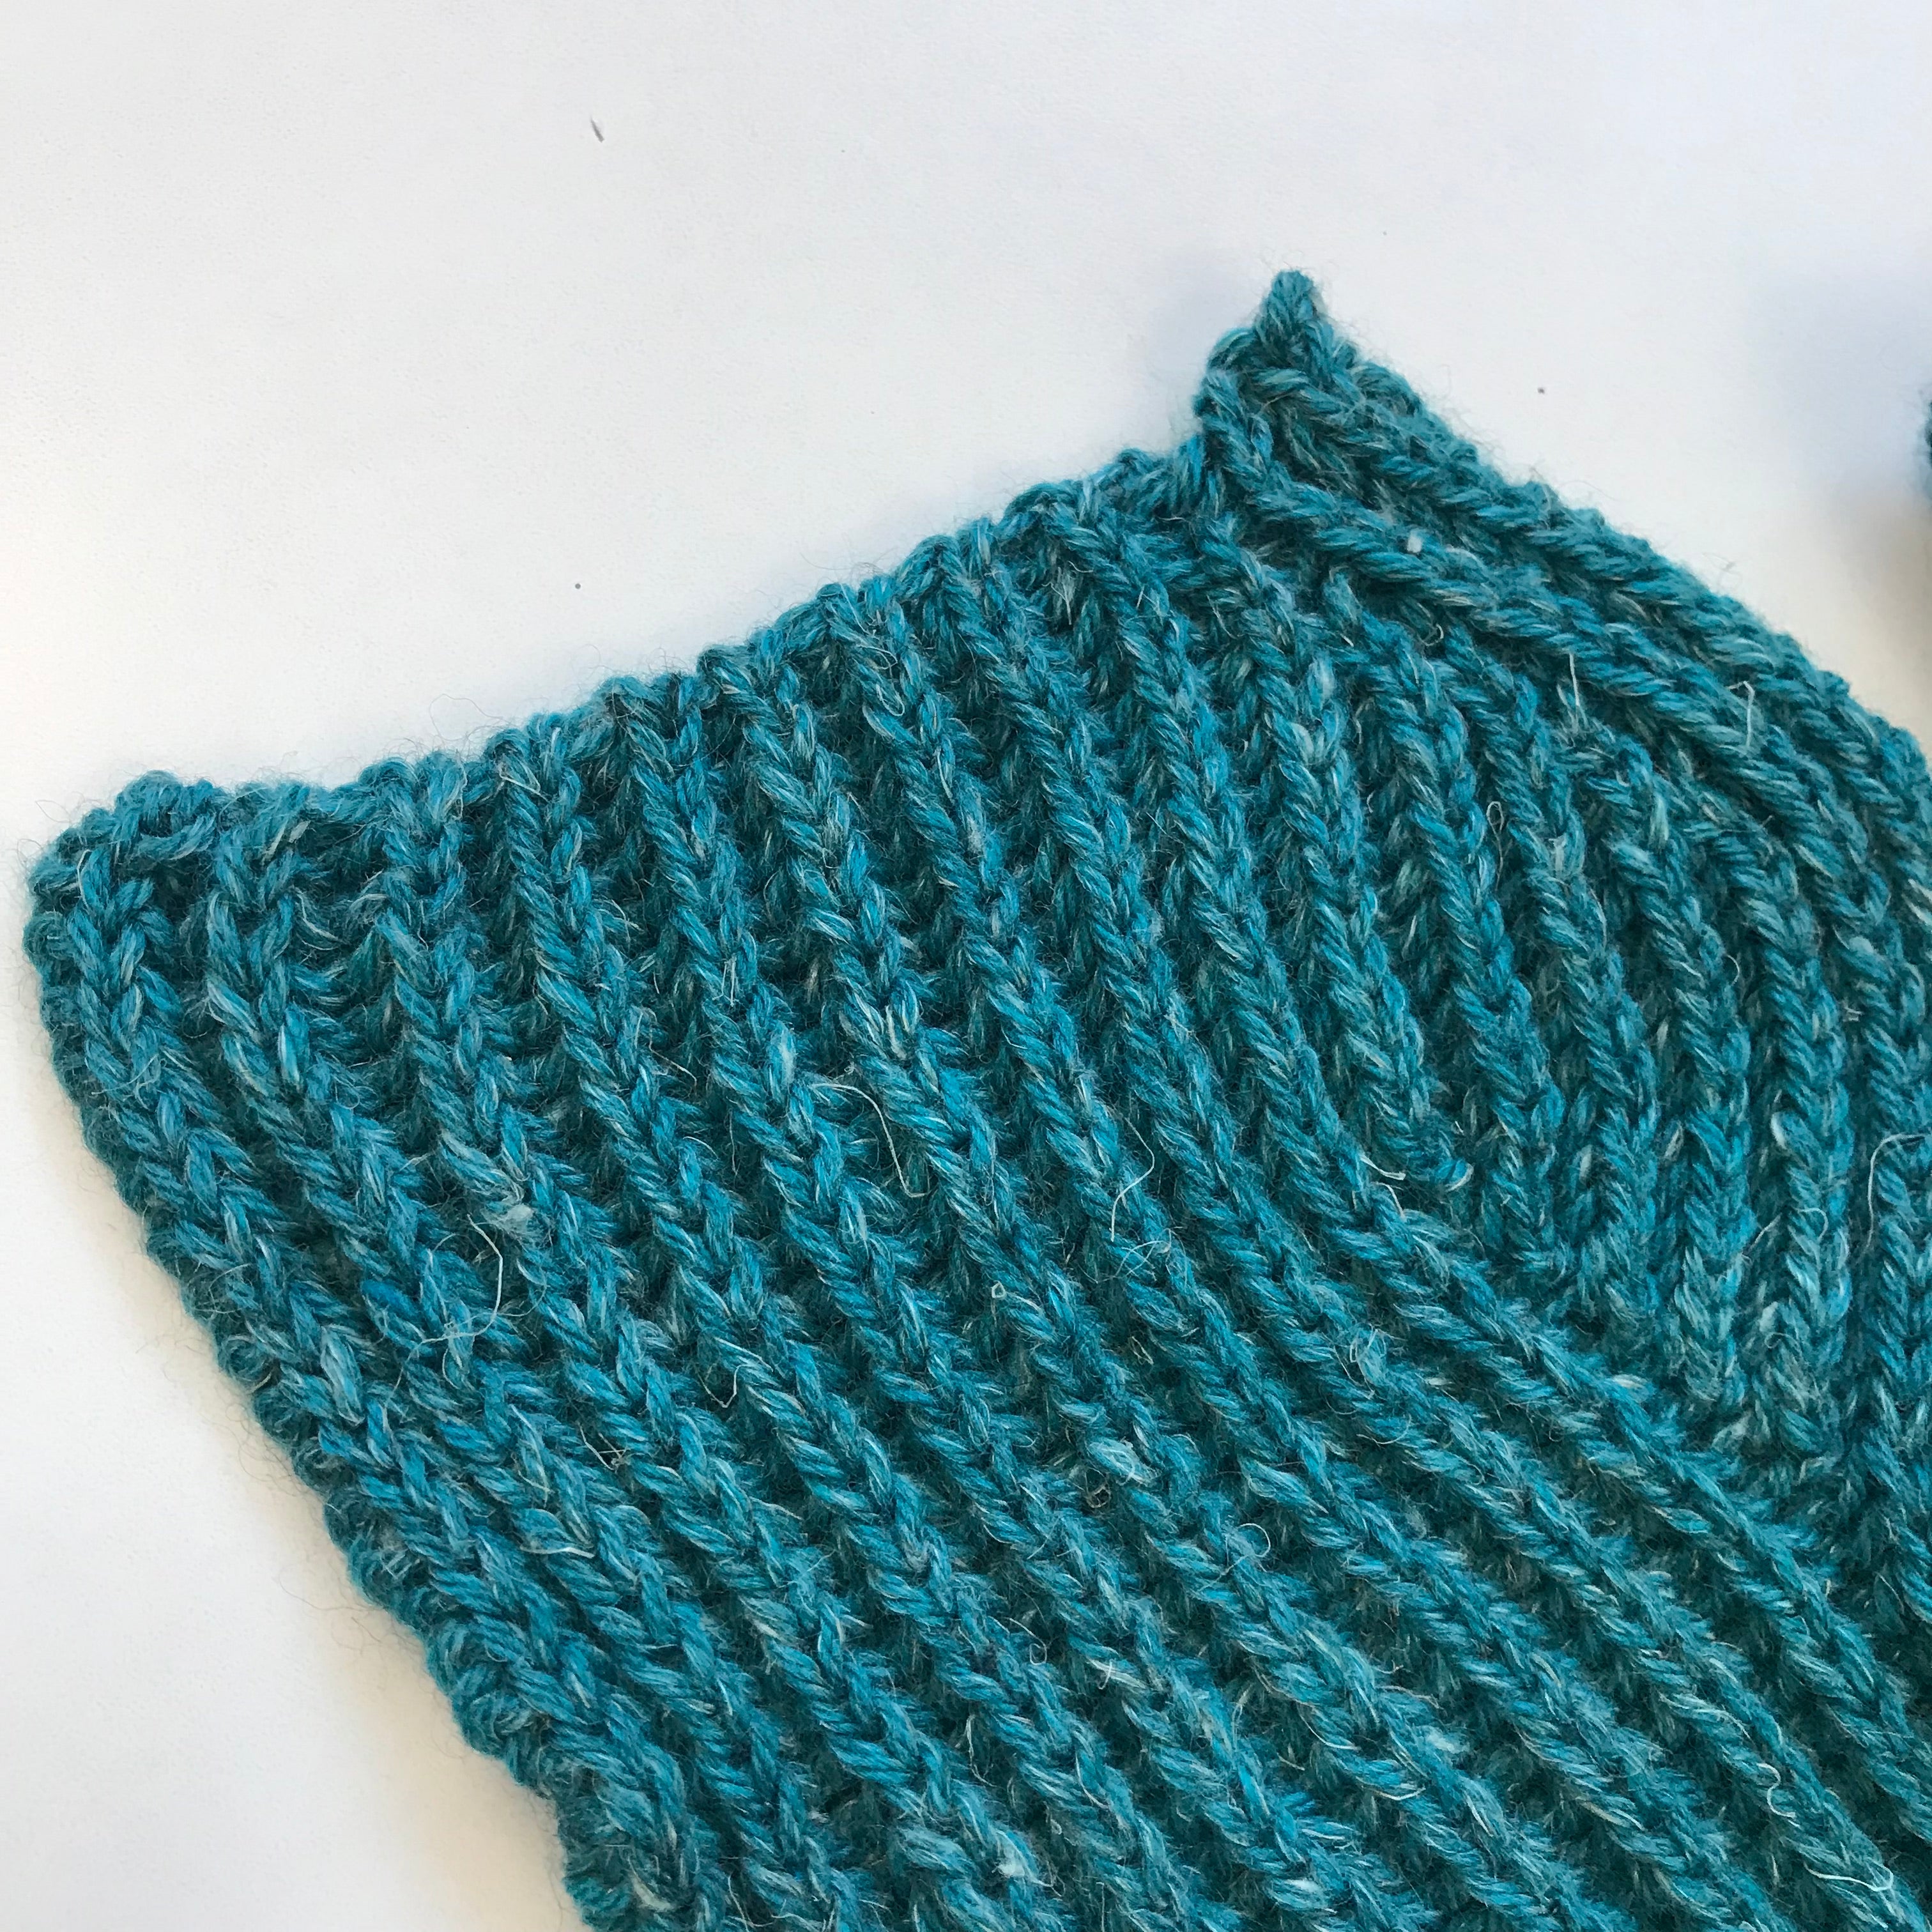 How to Work A Tubular Bind-Off | Knitting Tutorial